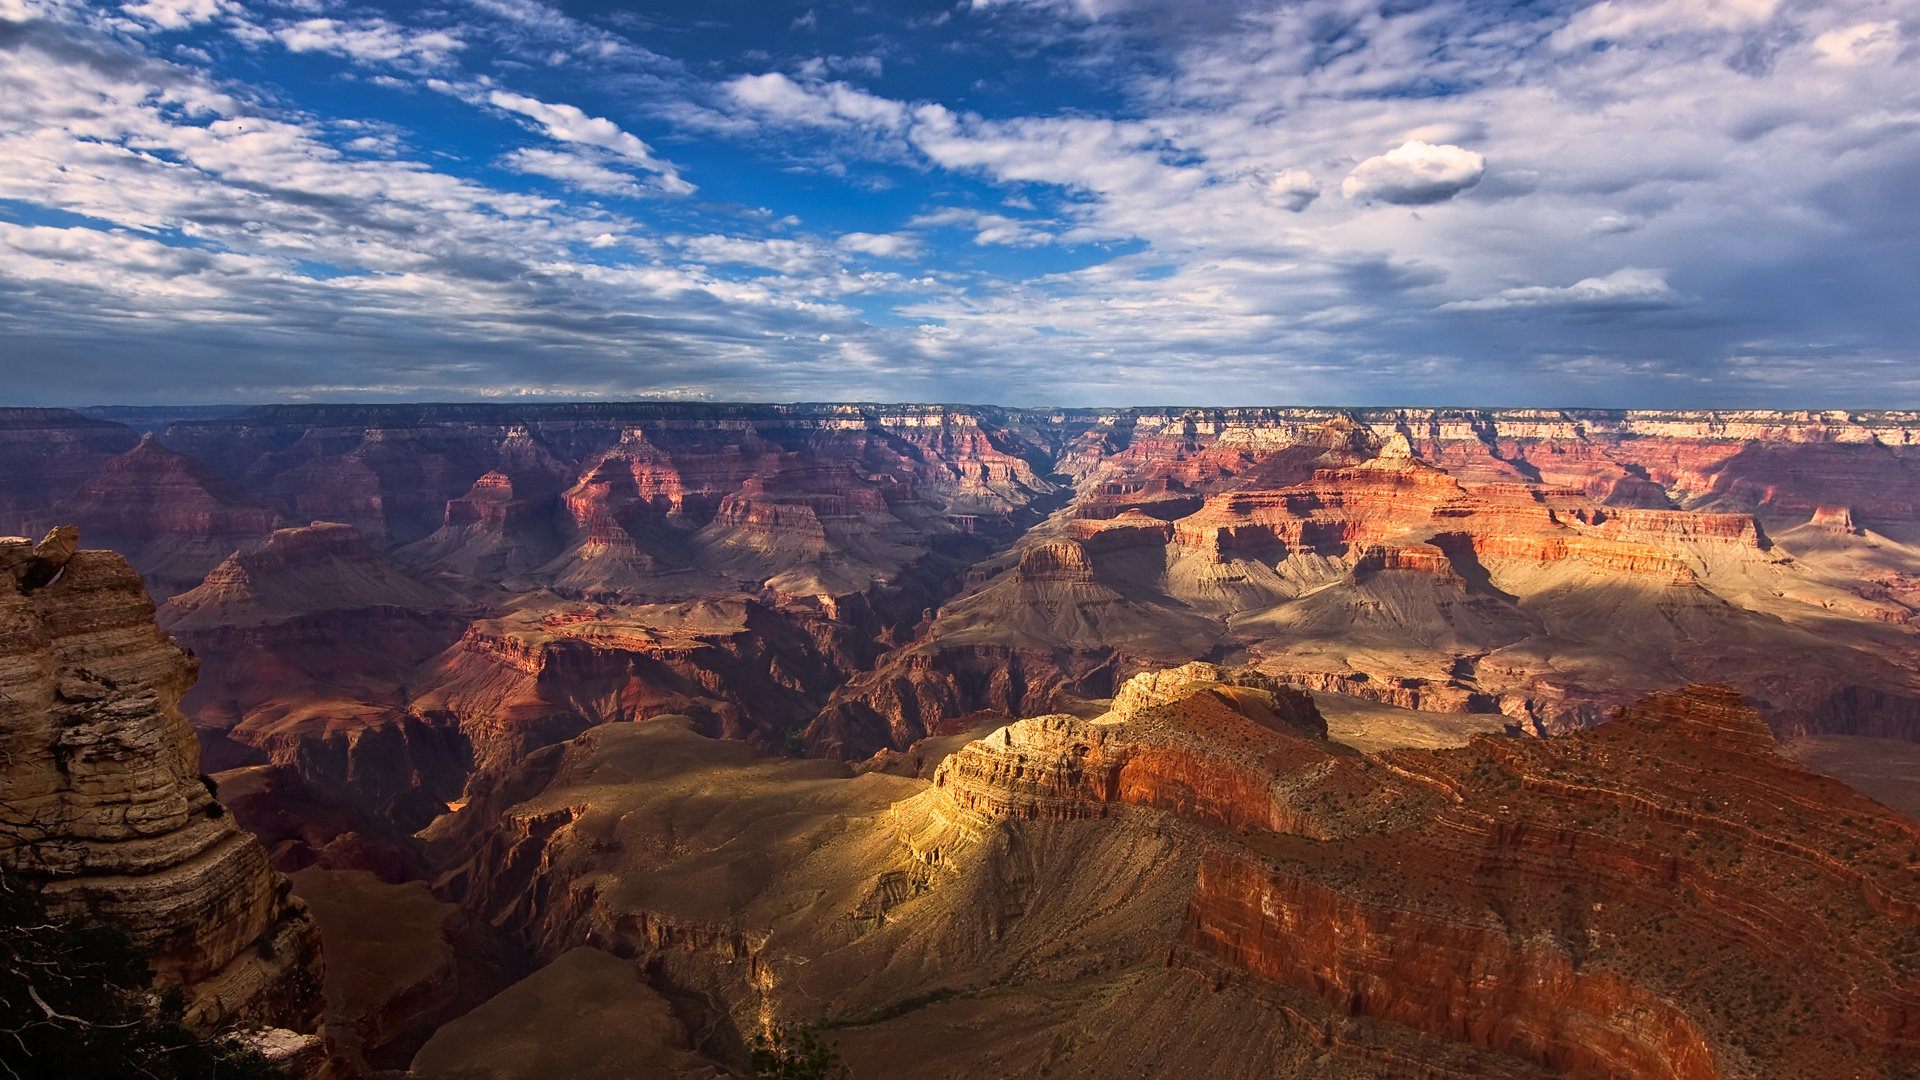 Download 1080p Grand Canyon desktop background ID:45026 for free